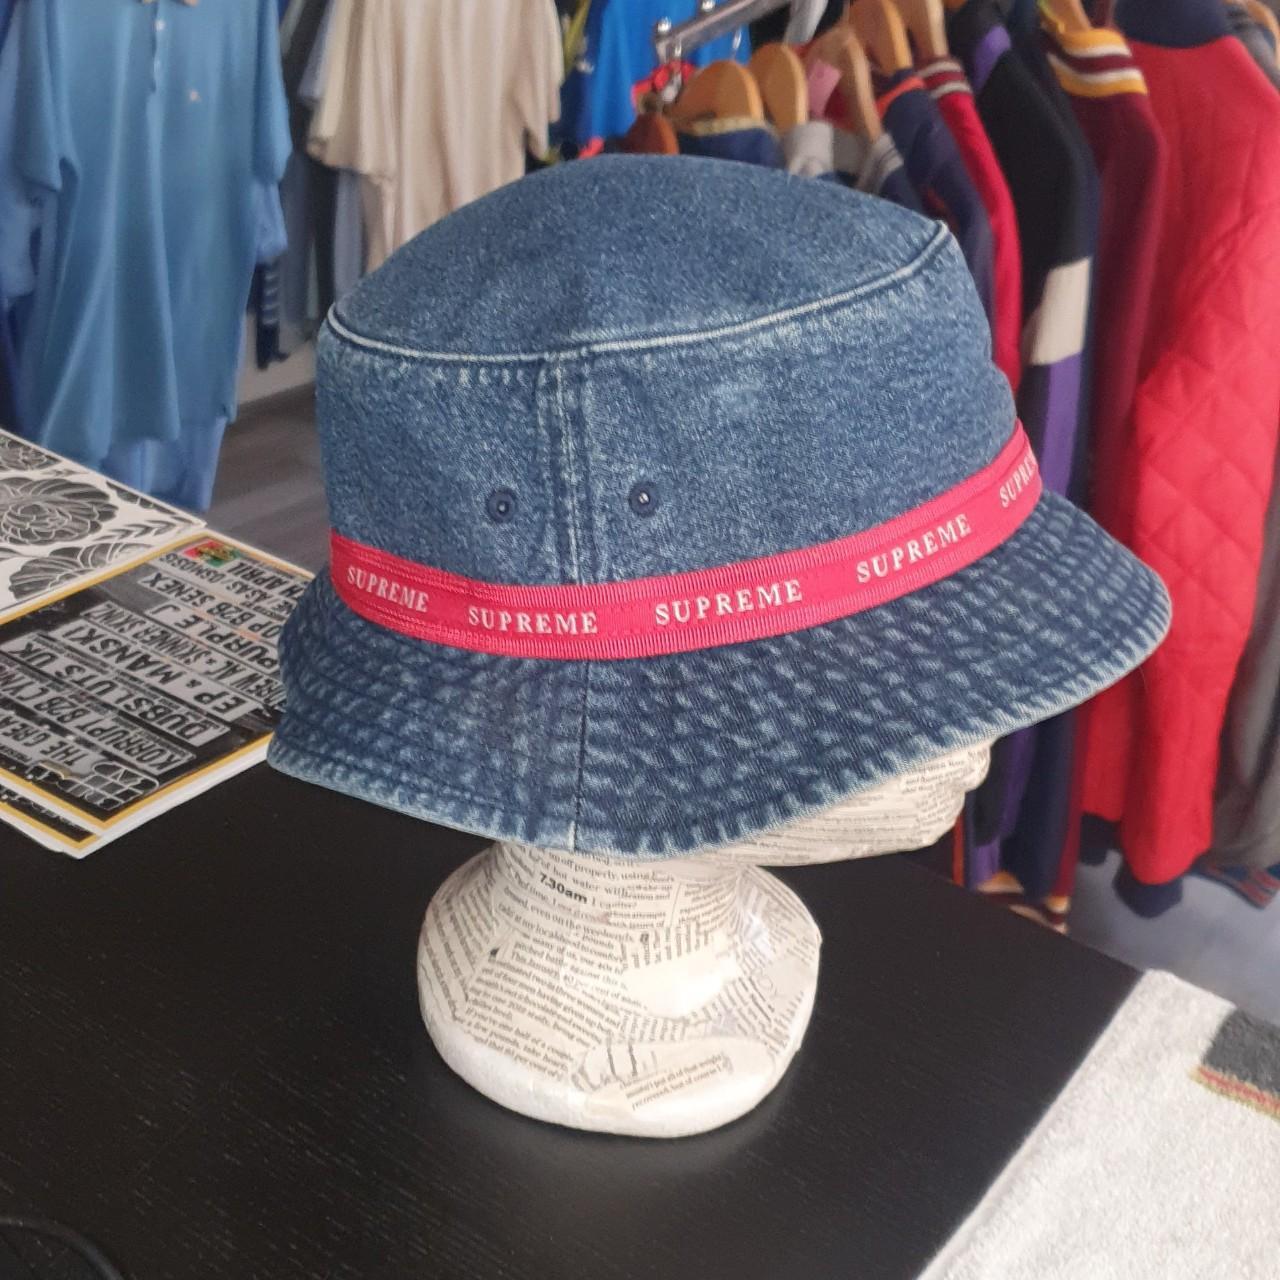 Supreme Men's Blue and Red Hat (2)